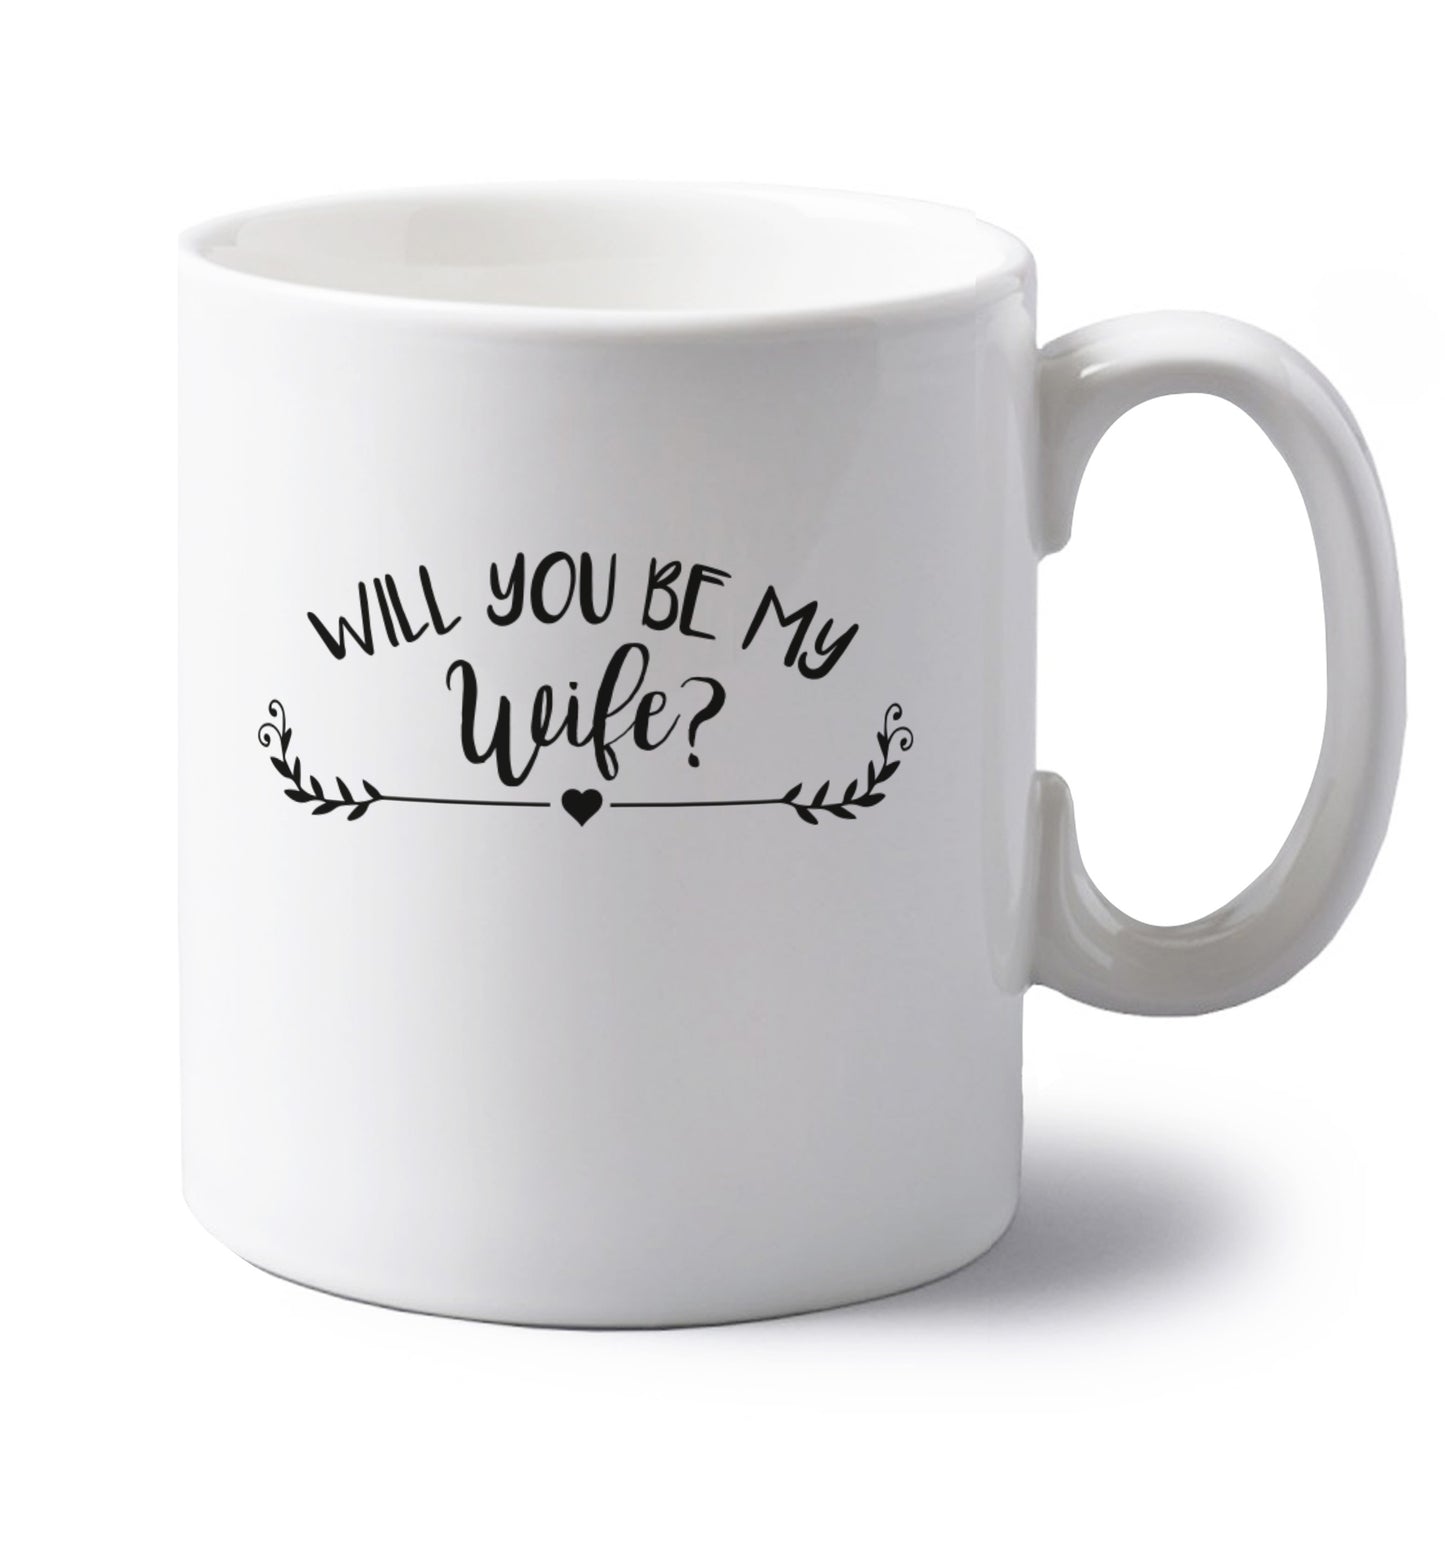 Will you be my wife? left handed white ceramic mug 